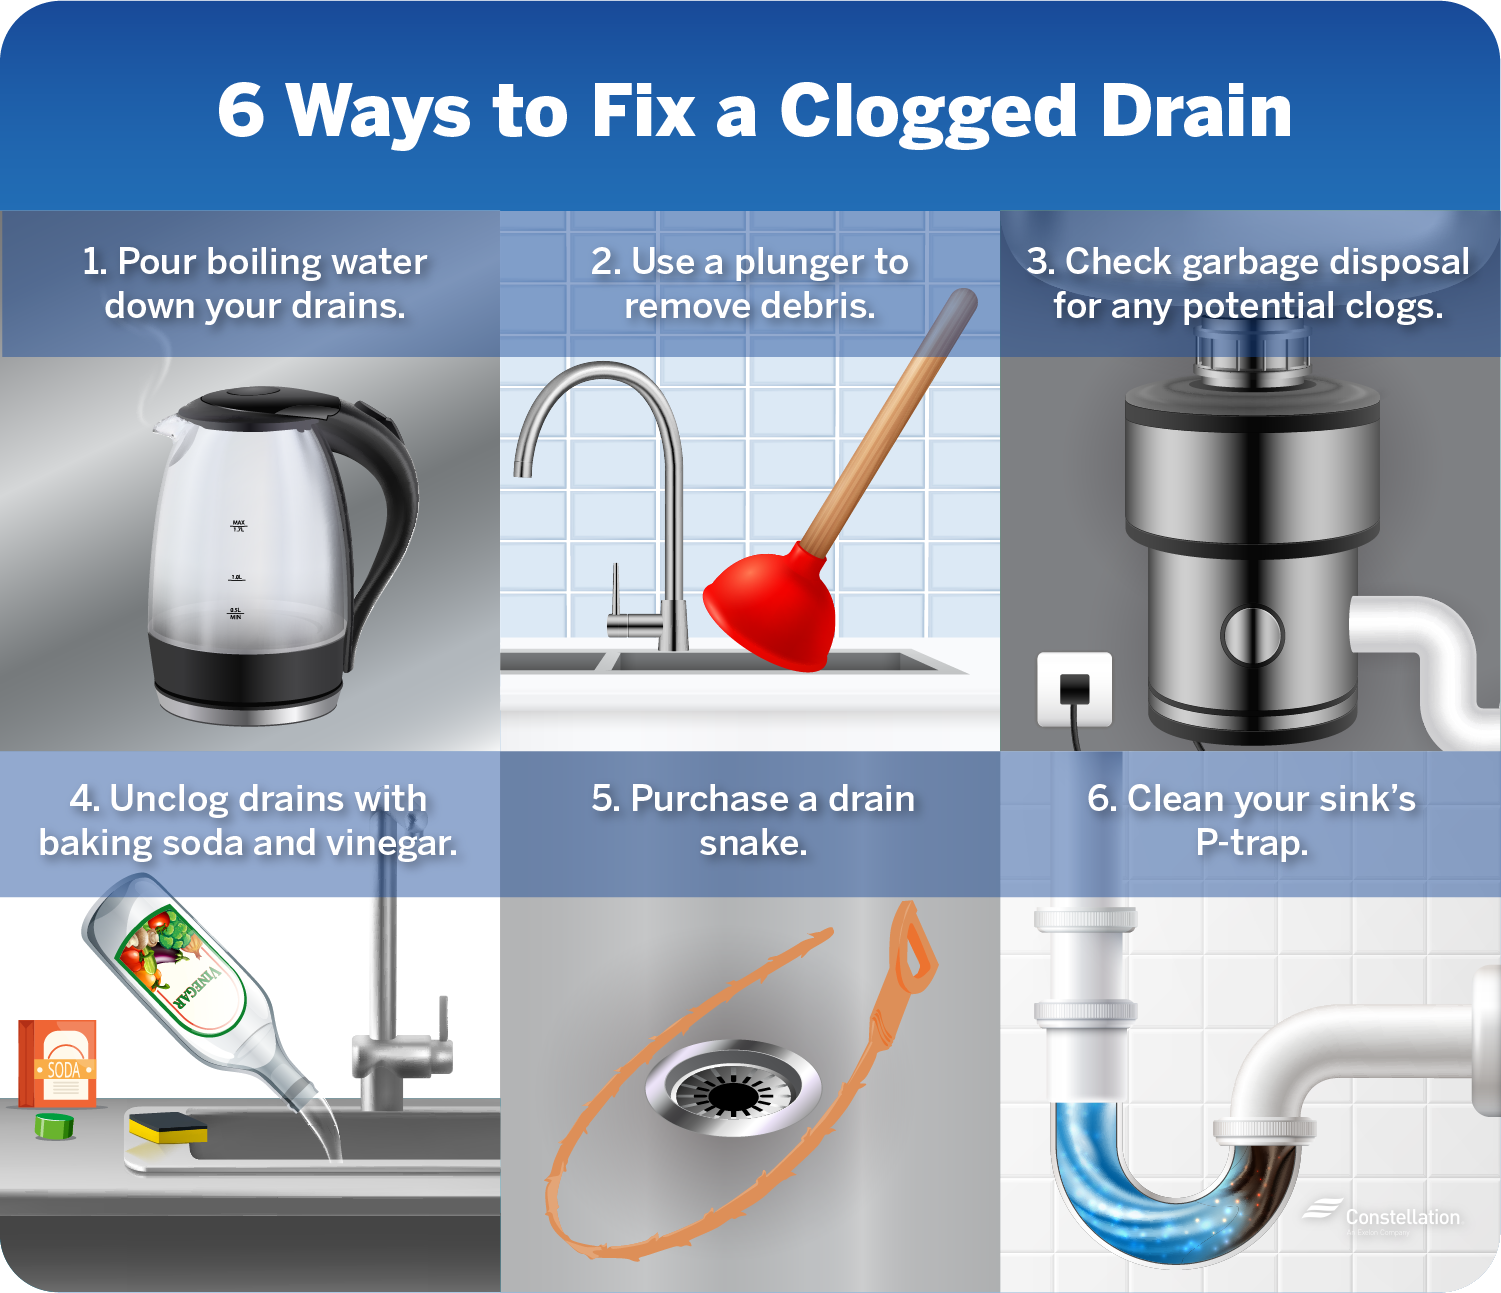 My Drain is Clogged – Should I Call a Professional?